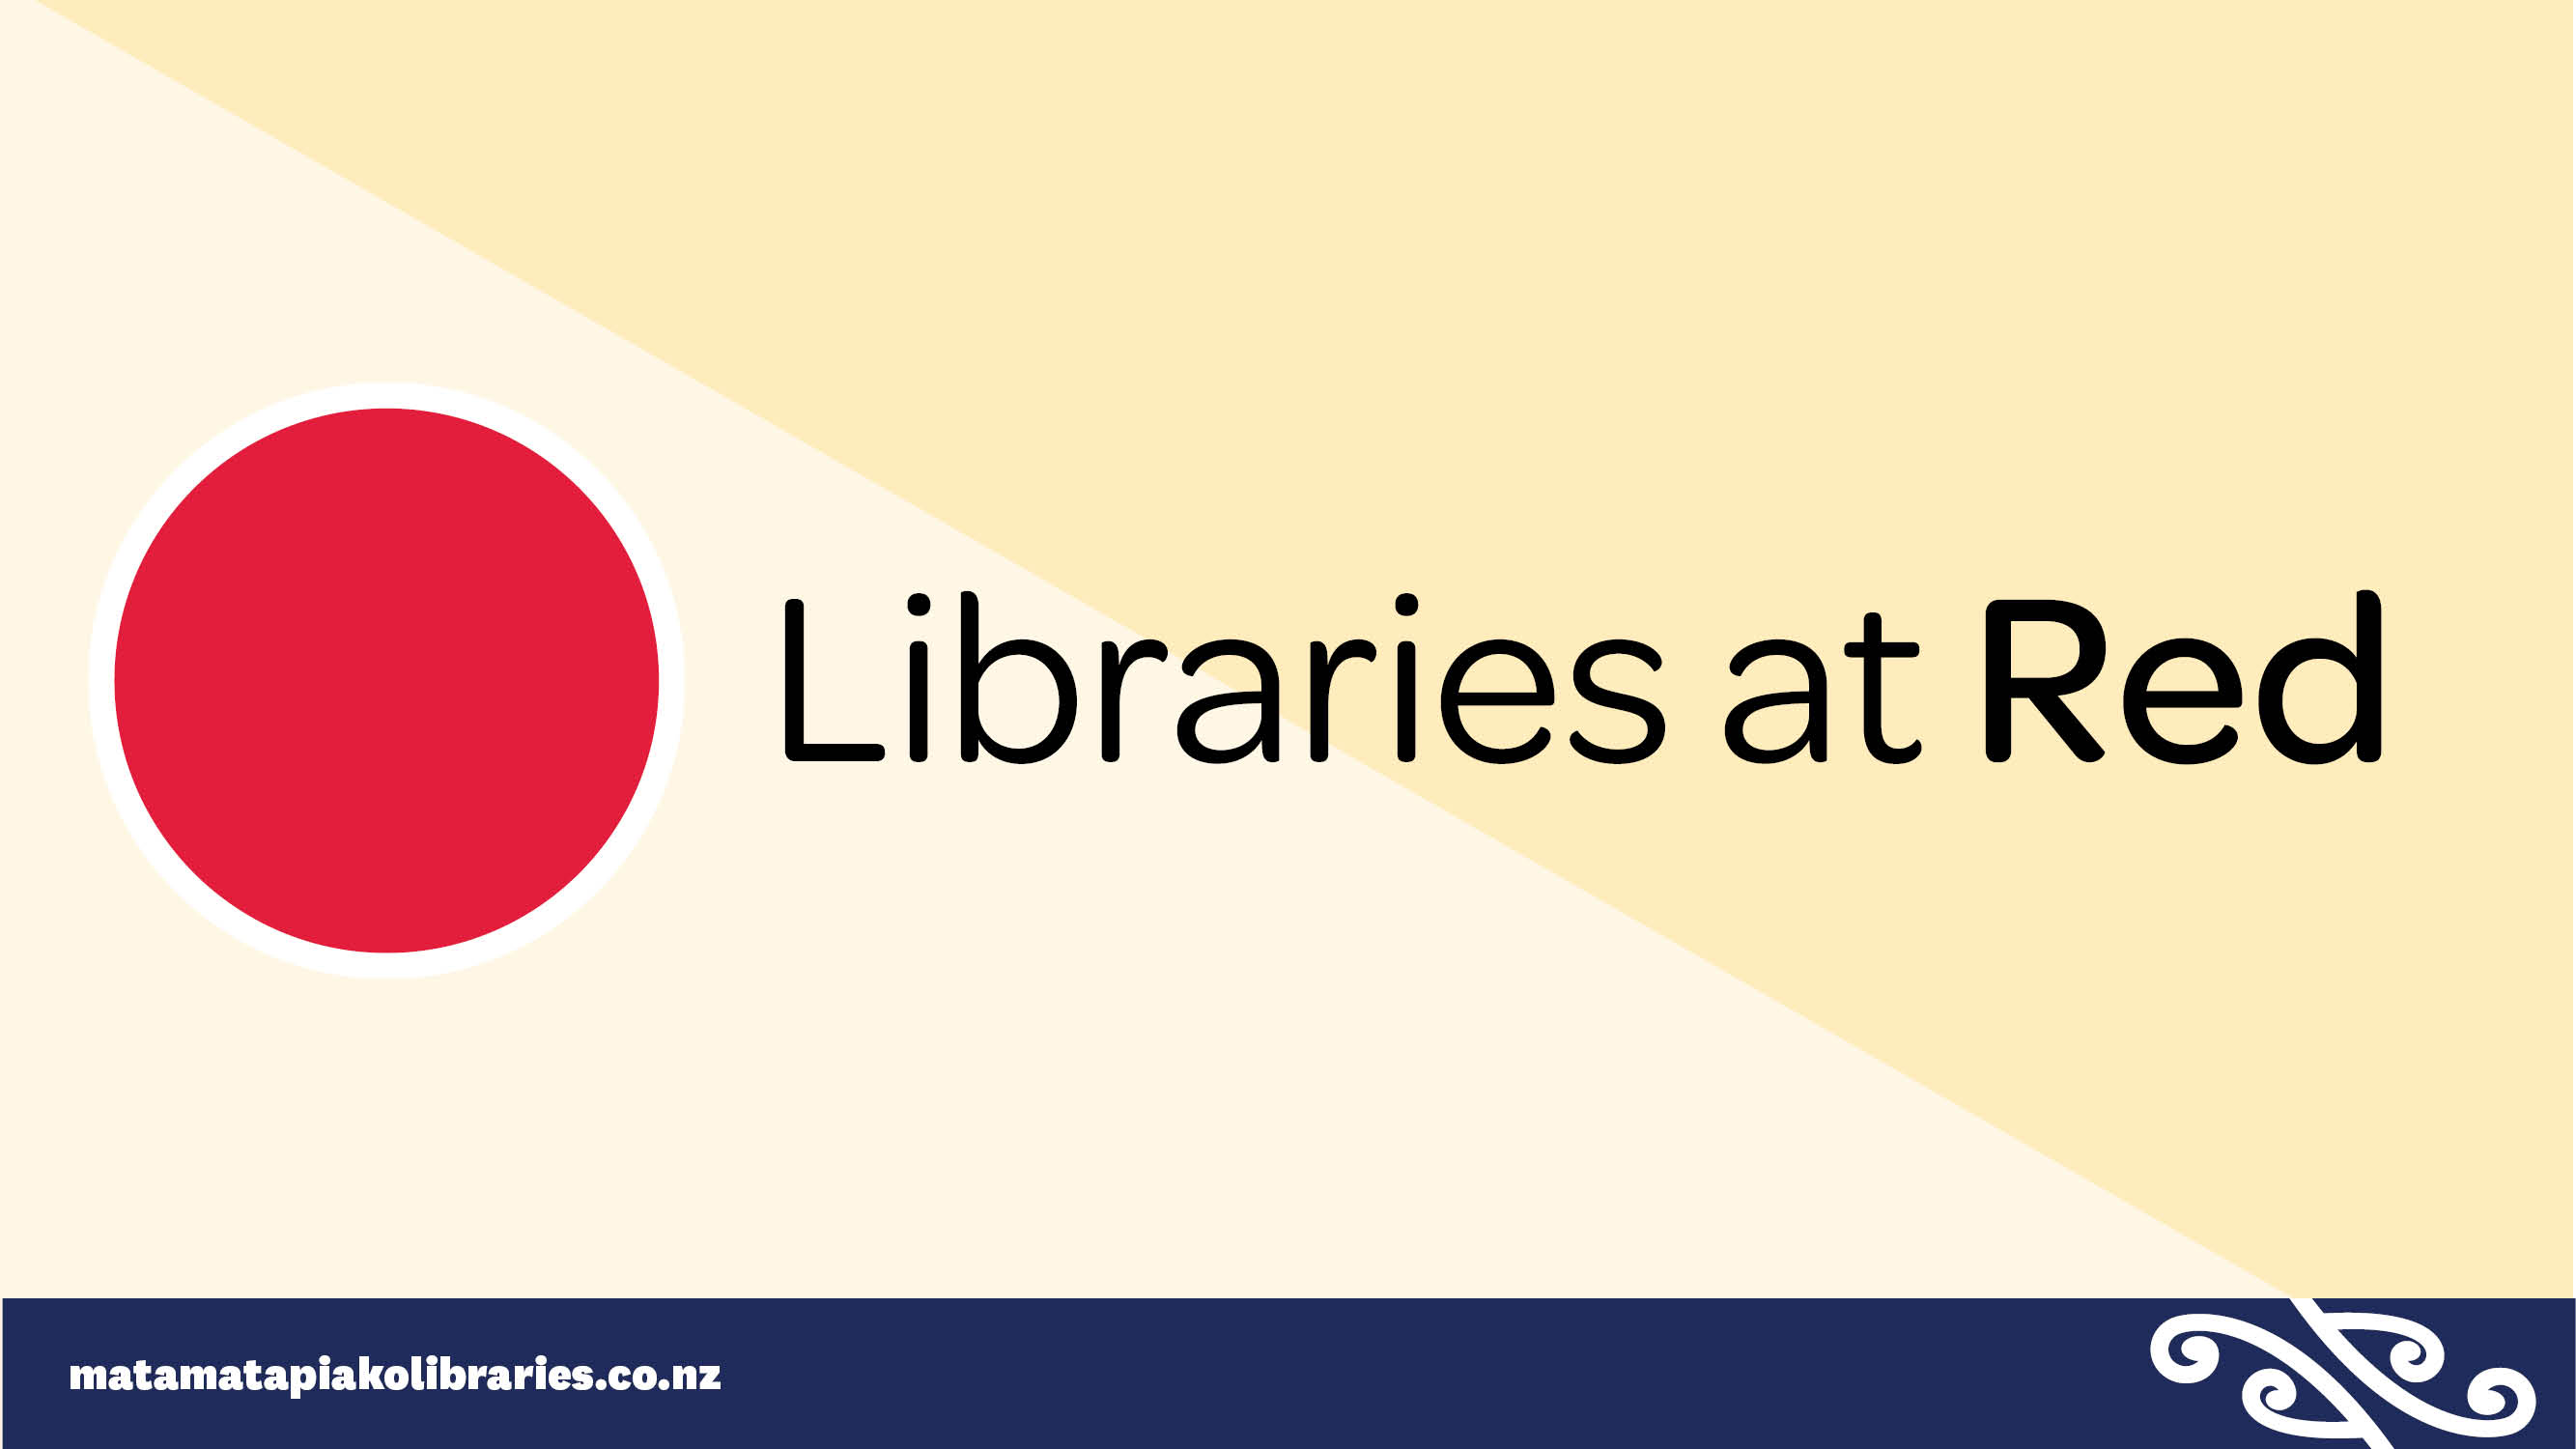 Our Libraries at Red - 14 March 2022 update